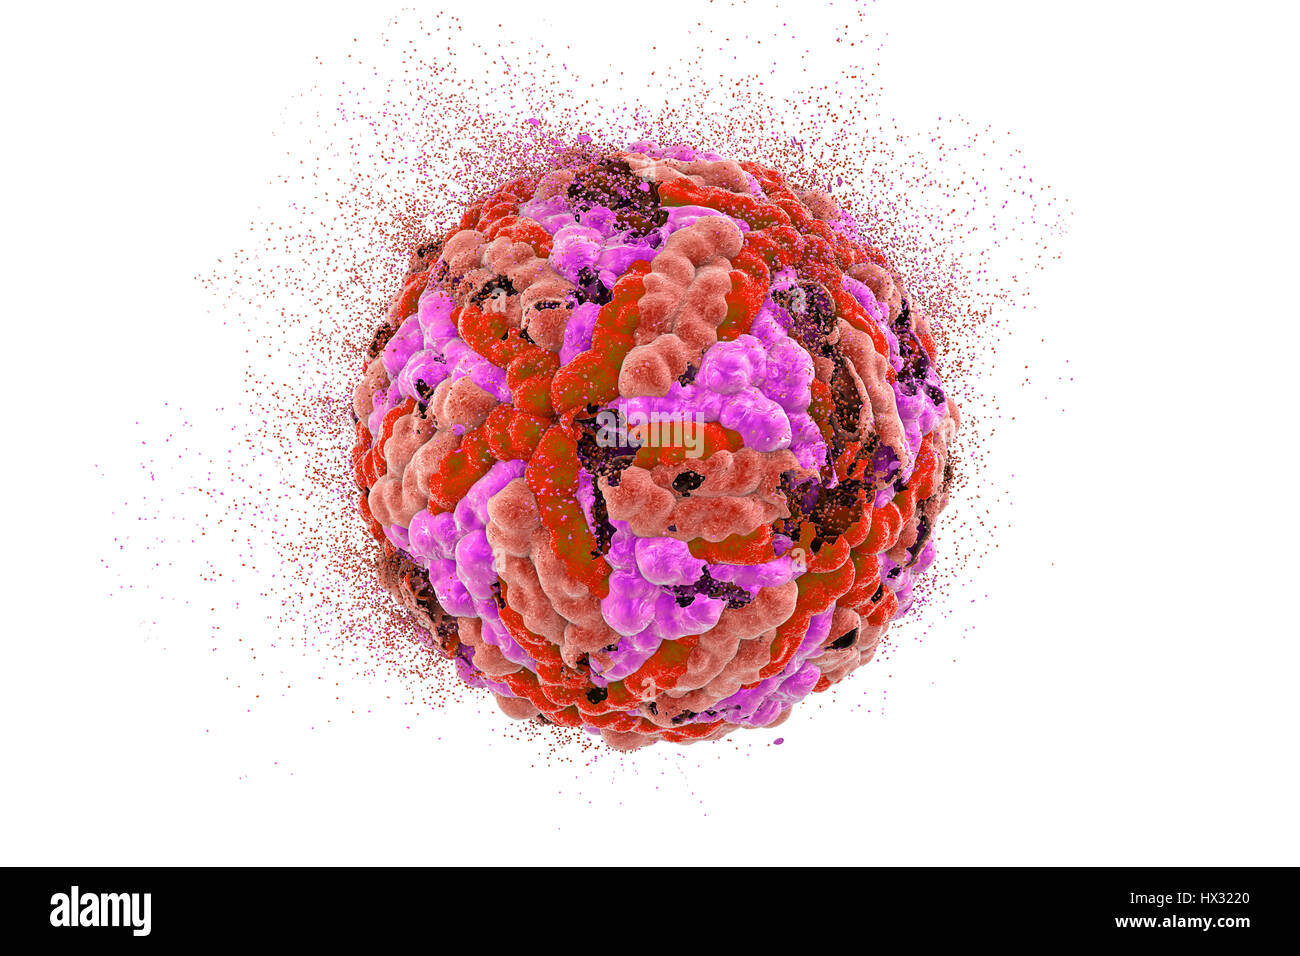 Interferon gamma, molecular model. Interferon gamma is produced by certain immune cells (T cells, dendritic cells and NK cells) as part of the immune response to invading pathogens and tumours. It is able to directly inhibit viral replication and also prompts neighbouring cells to produce protective enzymes and activates immune system cells. Stock Photo